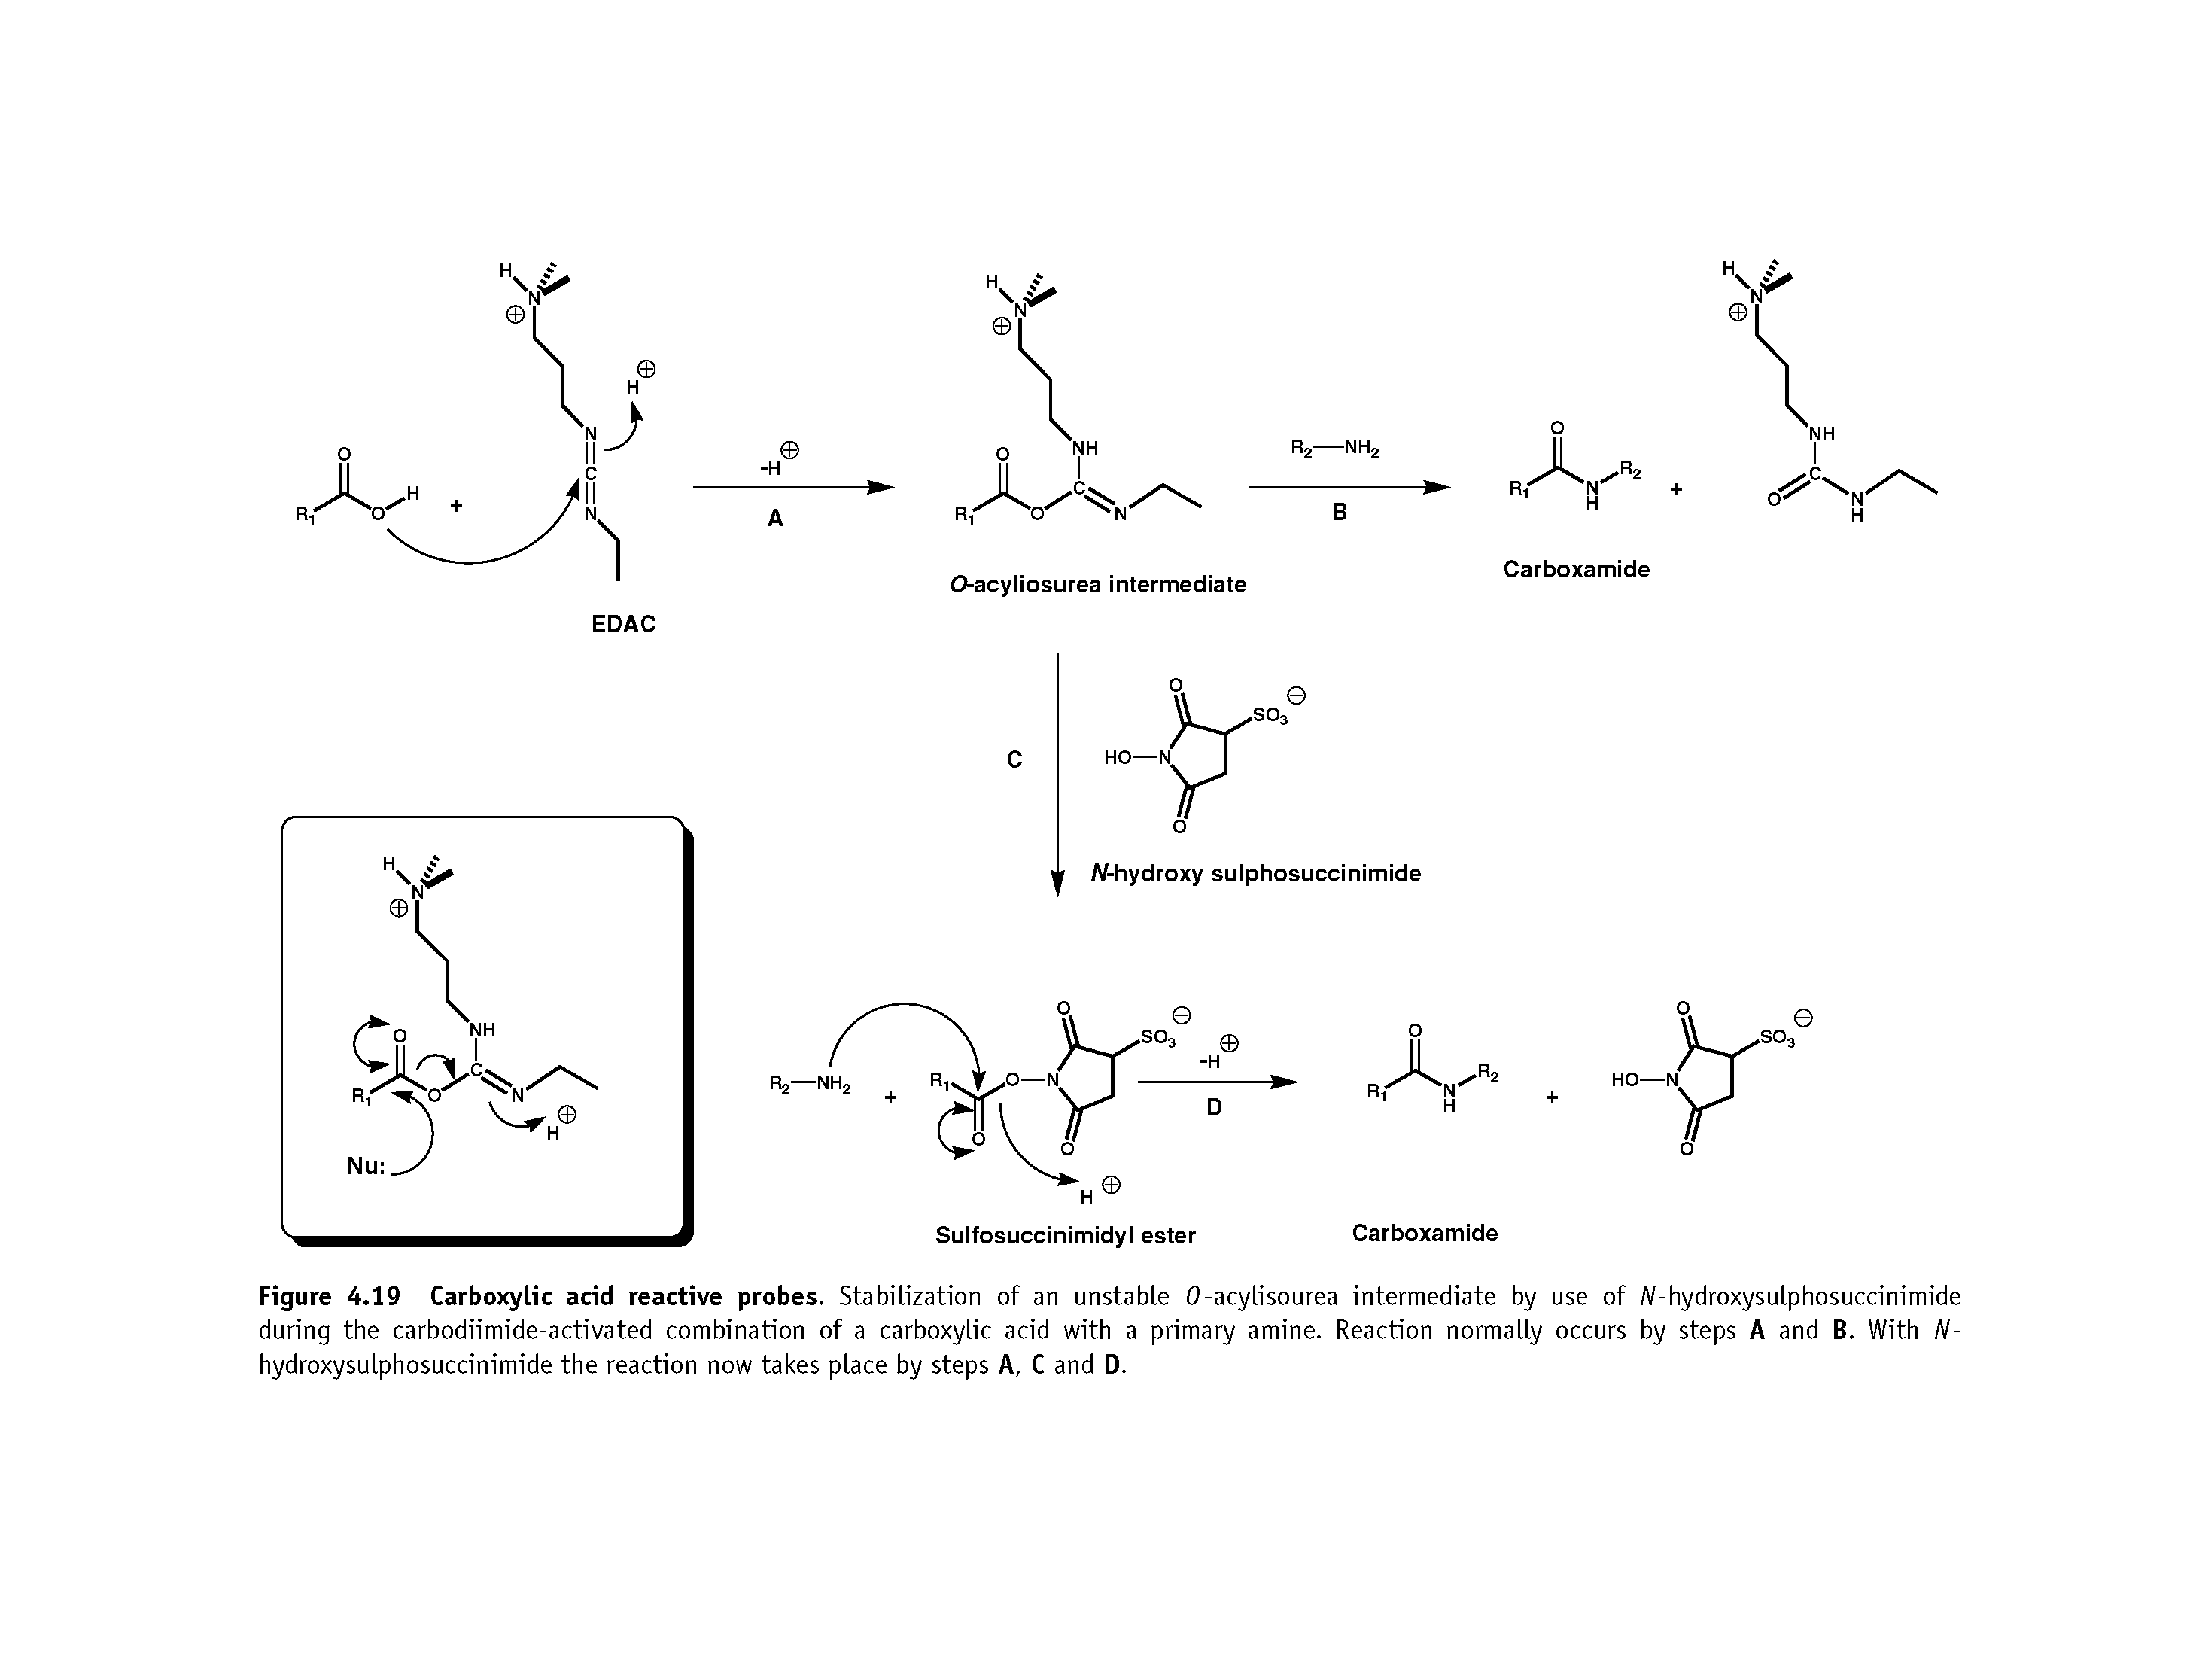 Figure 4.19 Carboxylic acid reactive probes. Stabilization of an unstable 0-acylisourea intermediate by use of A/-hydroxysulphosuccinimide during the carbodiimide-activated combination of a carboxylic acid with a primary amine. Reaction normally occurs by steps A and B. With N-hydroxysulphosuccinimide the reaction now takes place by steps A, C and D.